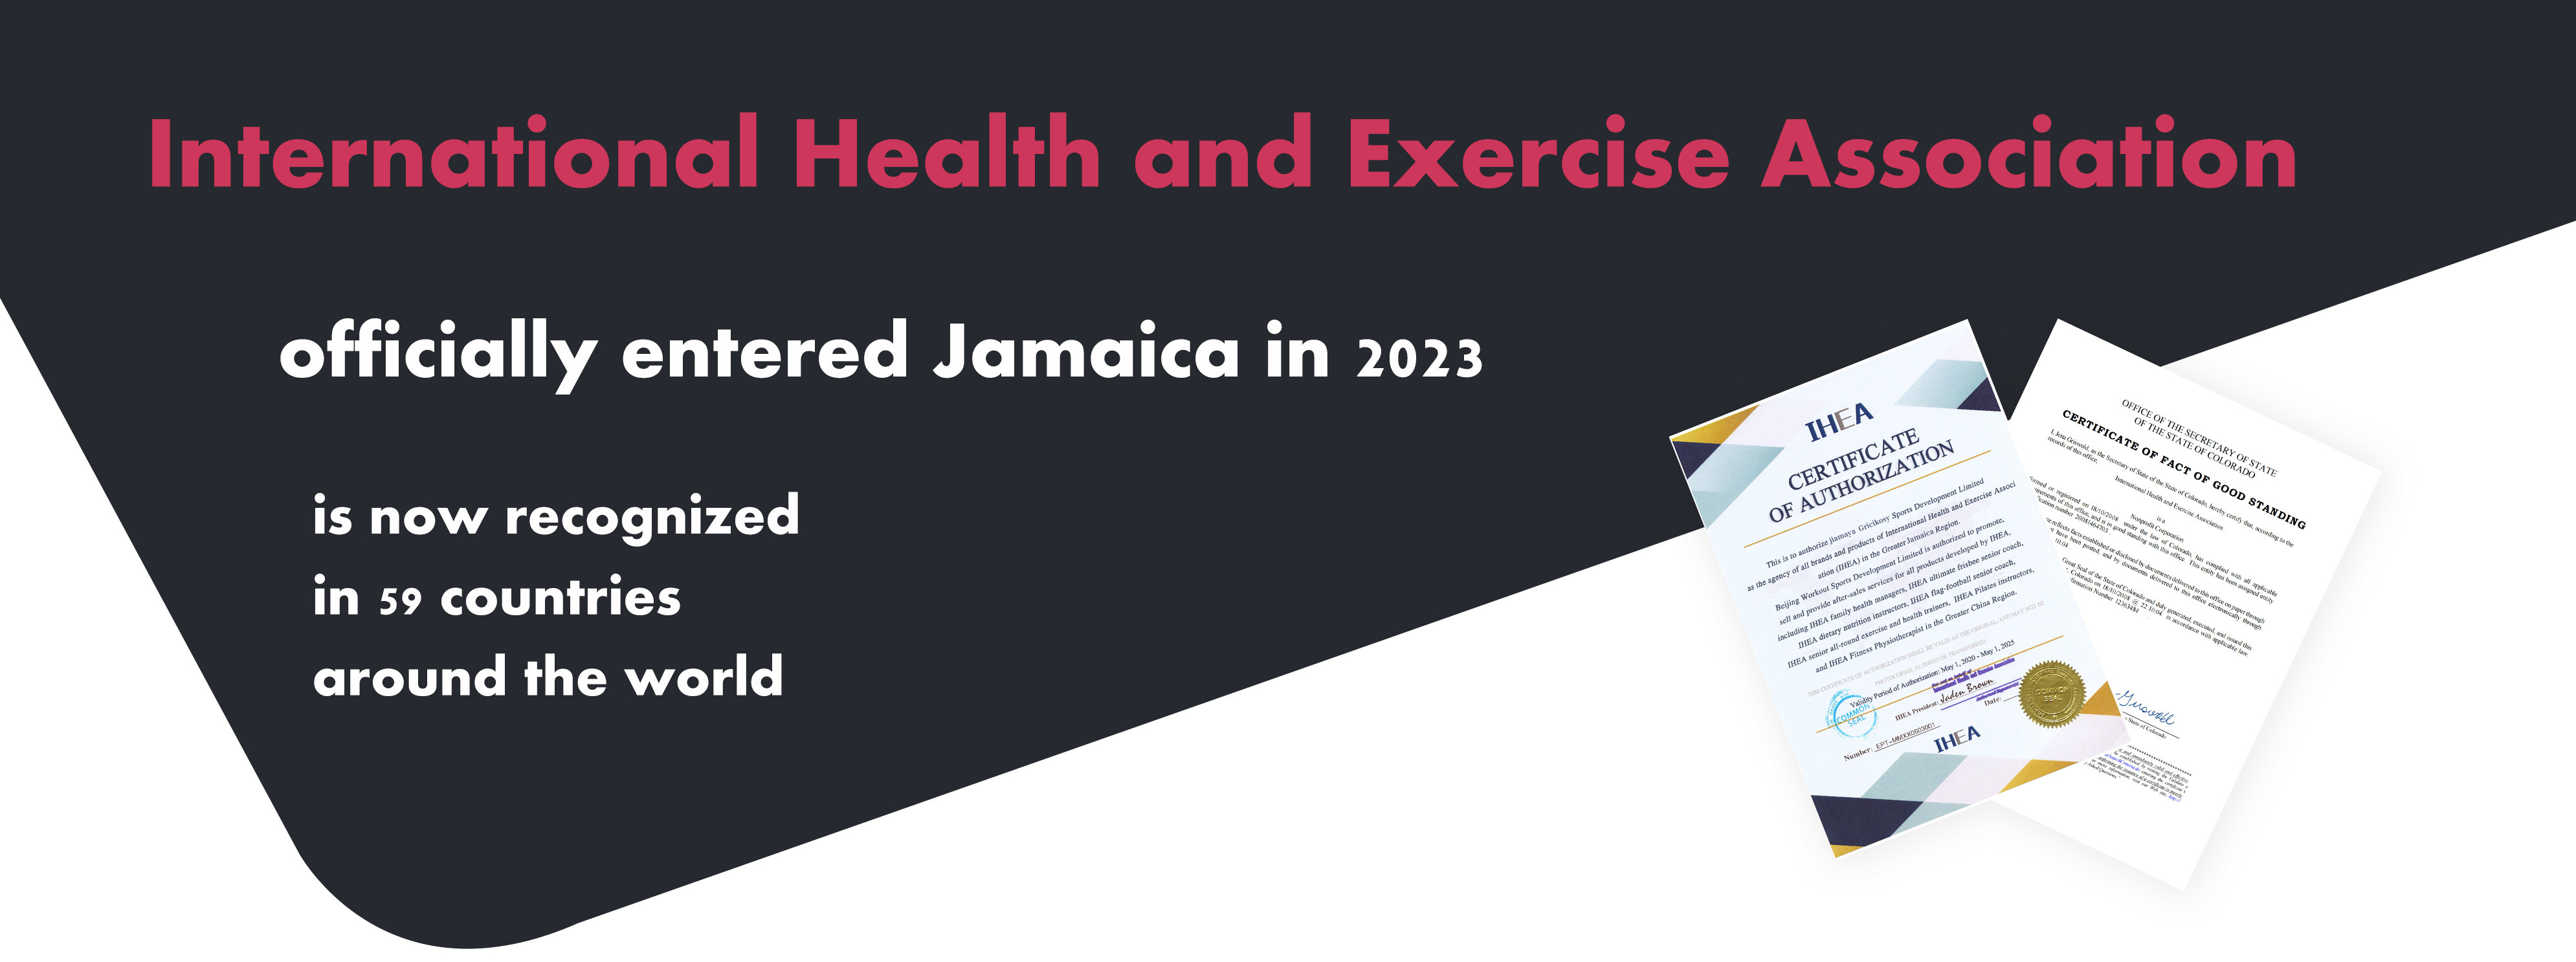  (IHEA) International Health and Exercise Association